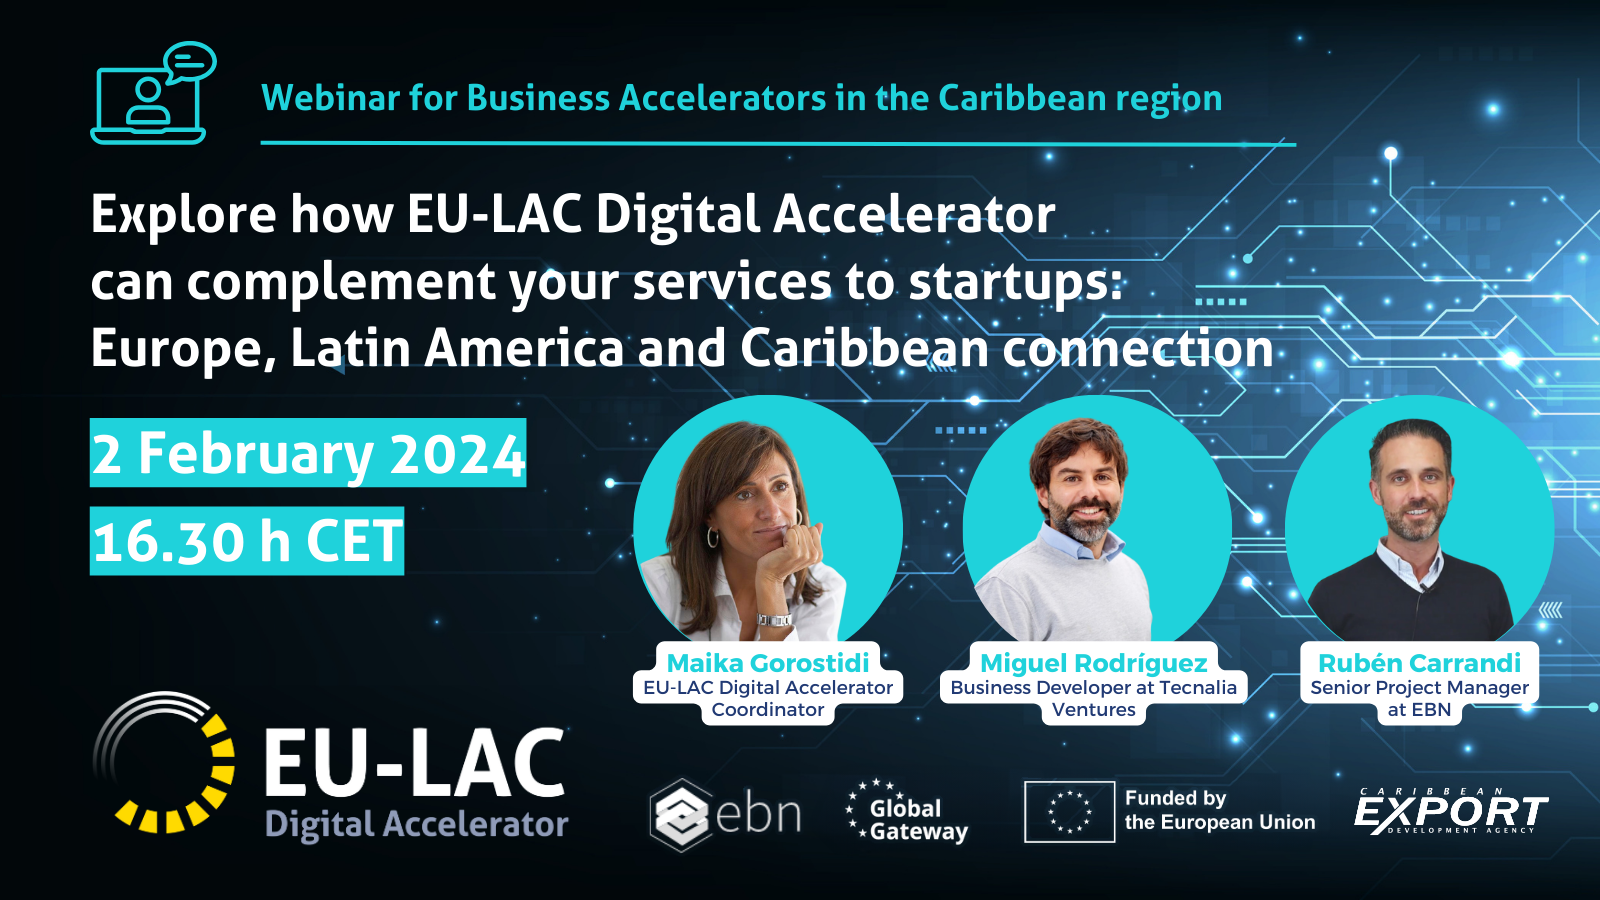 Webinar for Business Accelerators in Brazil and the Caribbean region: Explore how EU-LAC Digital Accelerator can complement your services to startups, Europe, Latin America and Caribbean connection.